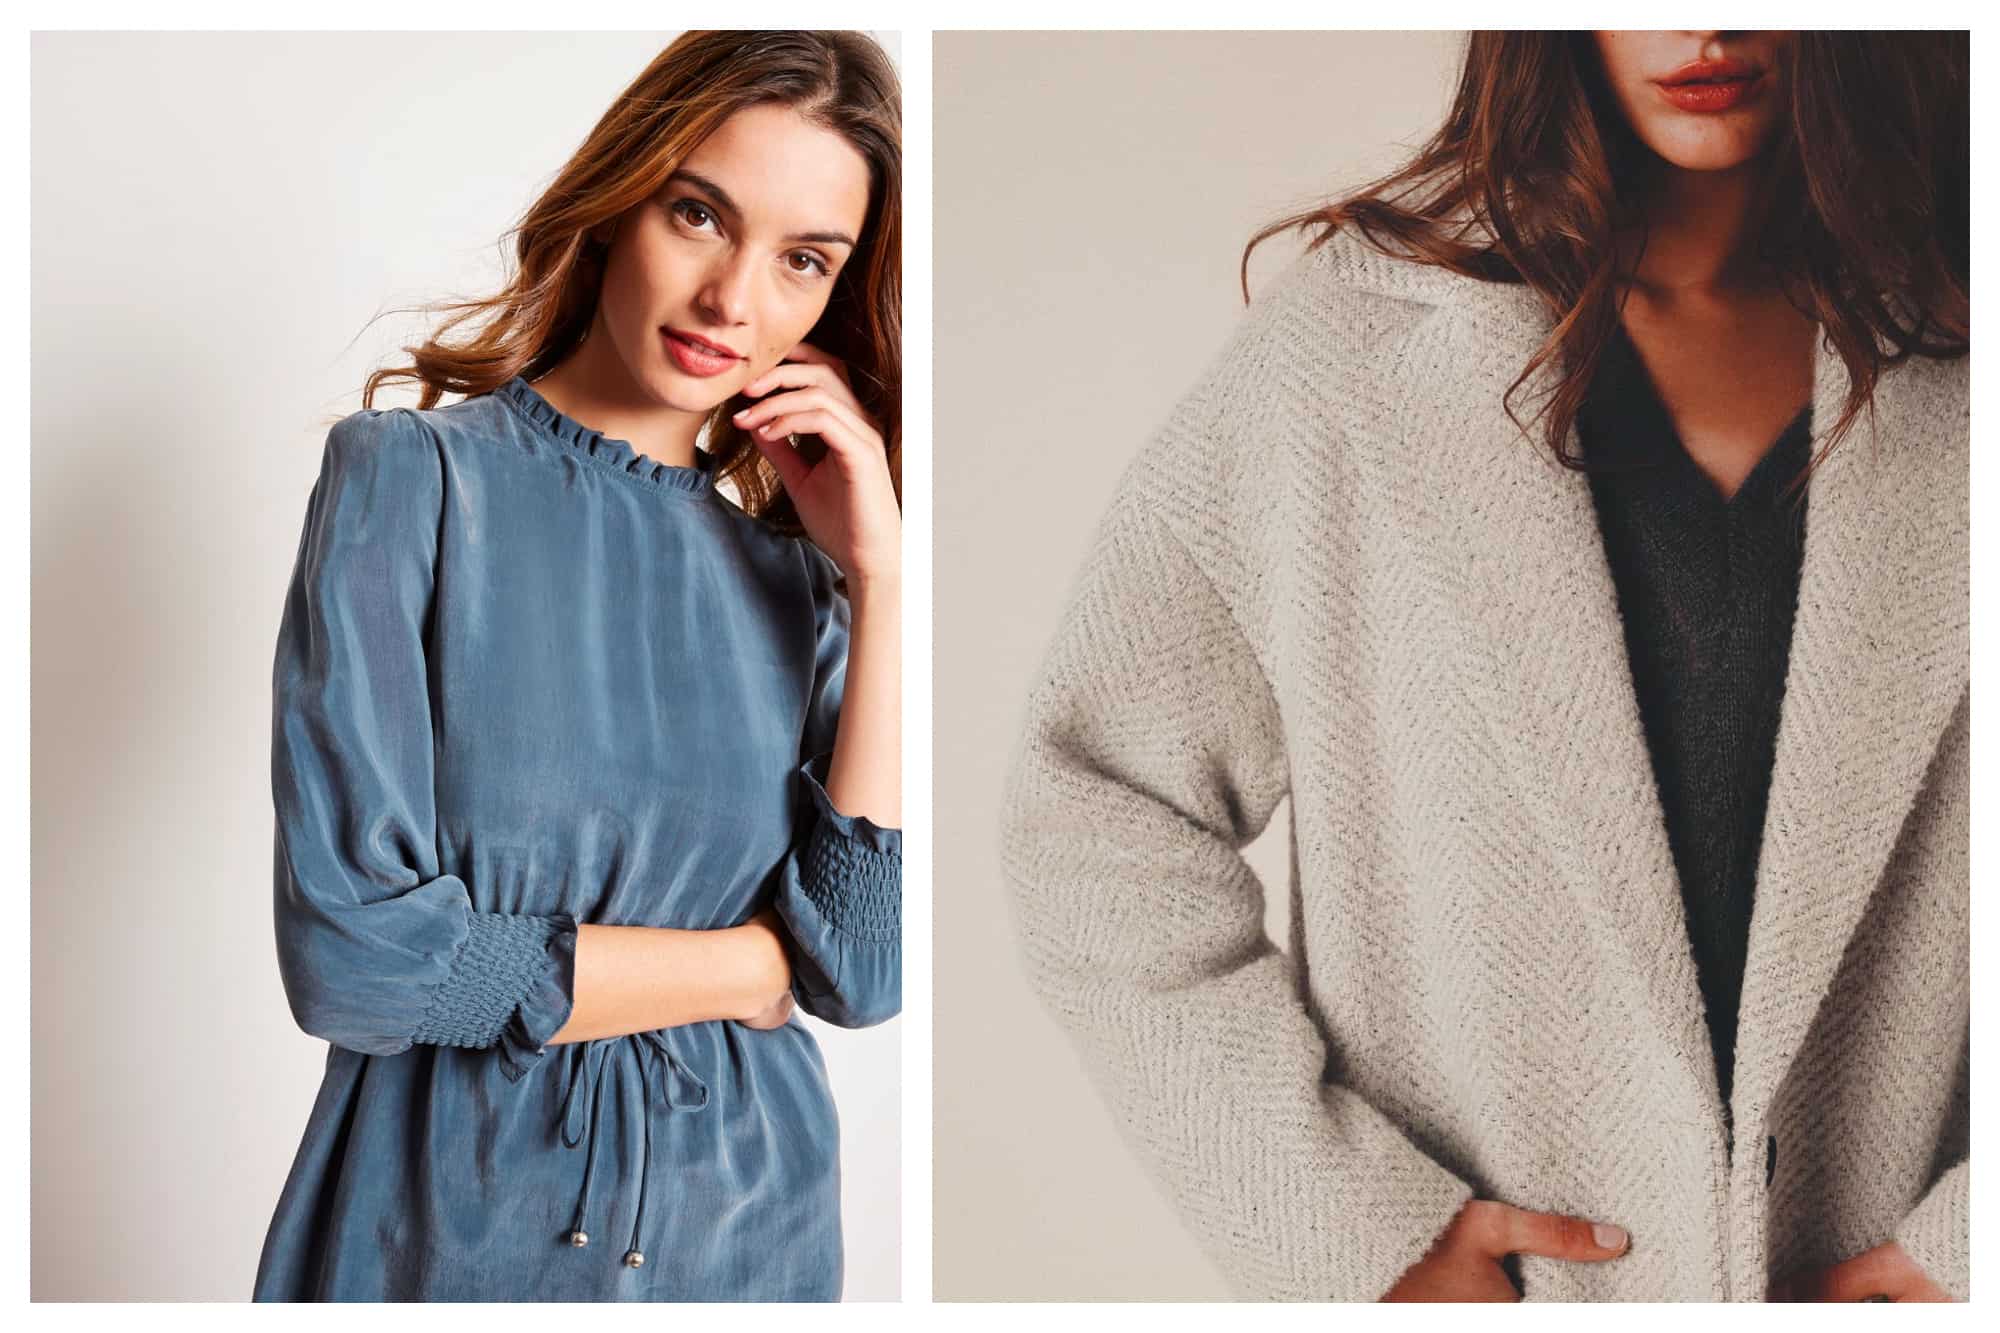 On left, a brunette model wears a satin-y blue winter dress as she looks at the camera. On right, a model sports a cozy off-white coat with a large, deep V-neck lapel and deep pockets.